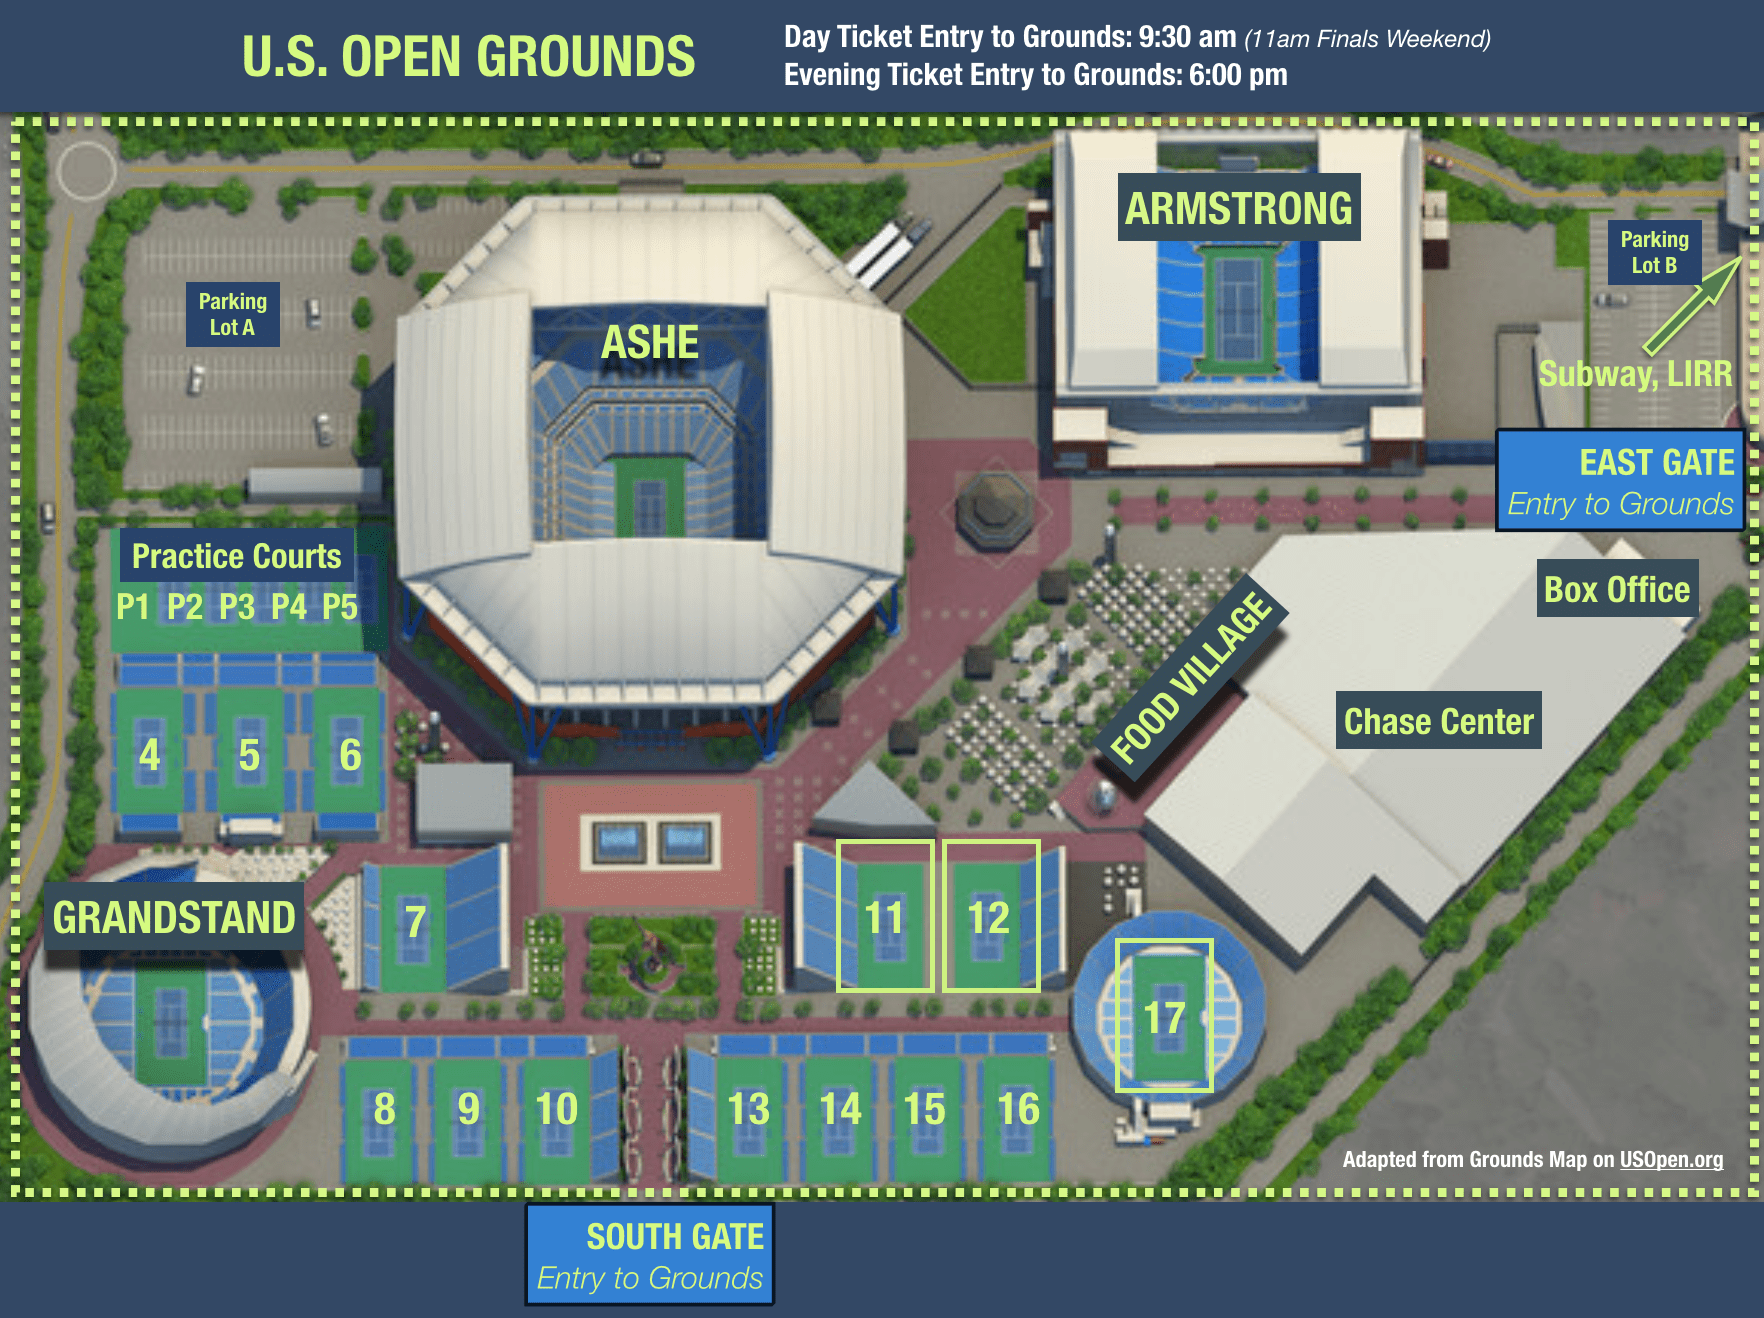 a serious tennis fan's top 10 tips for the 2019 us open